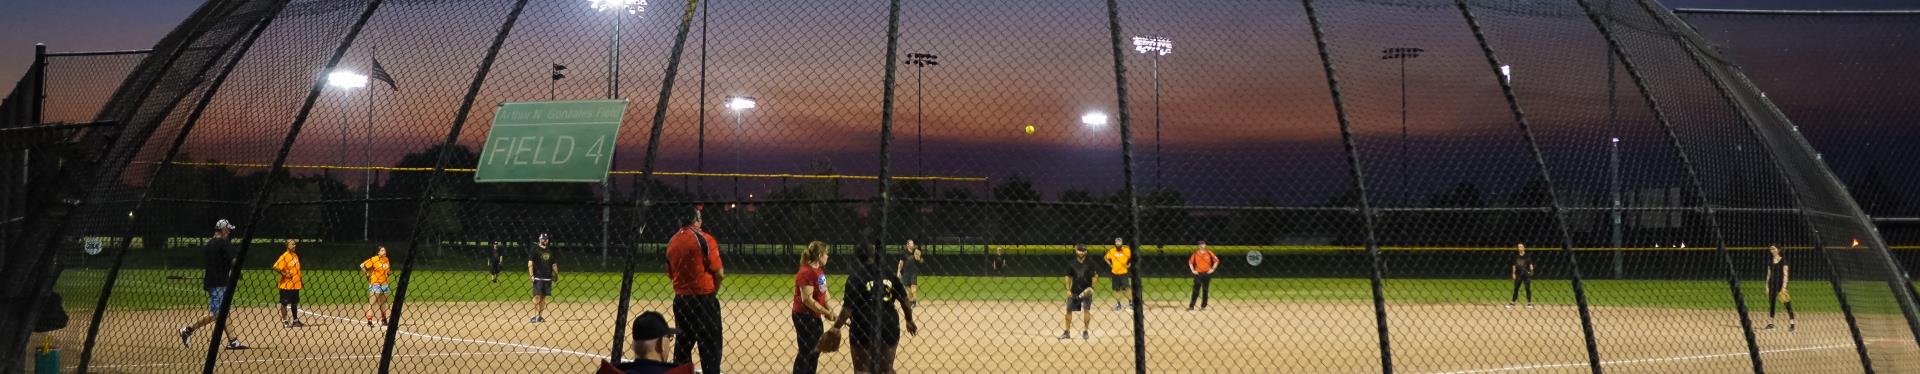 Adult Softball at Sunset Park Athletic Complex on Field 4